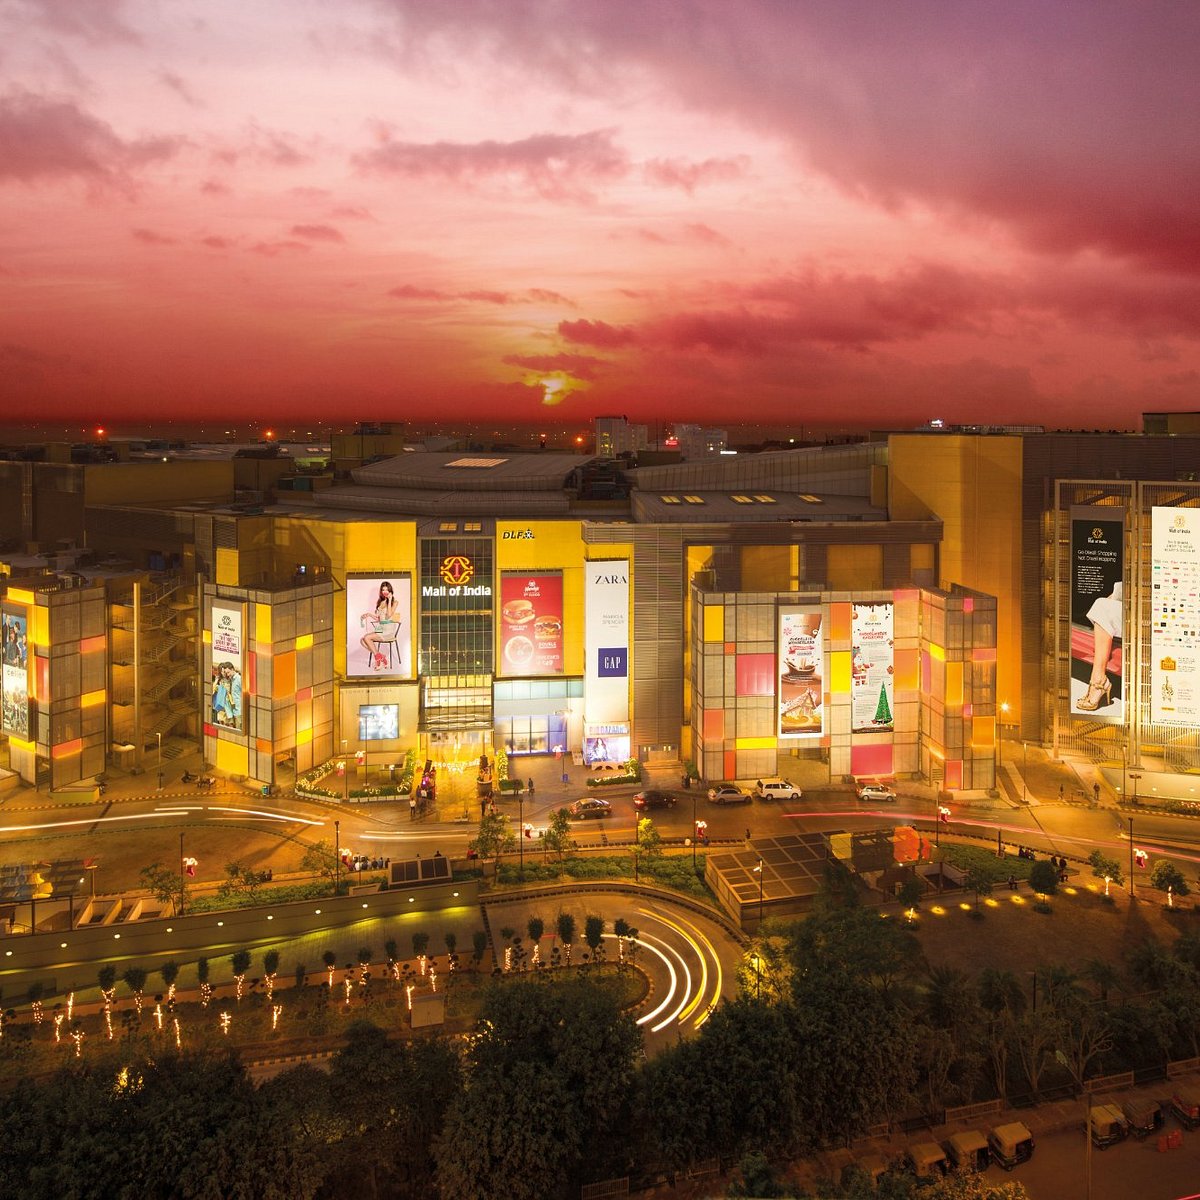 DLF – The Mall of India, Noida - Times of India Travel